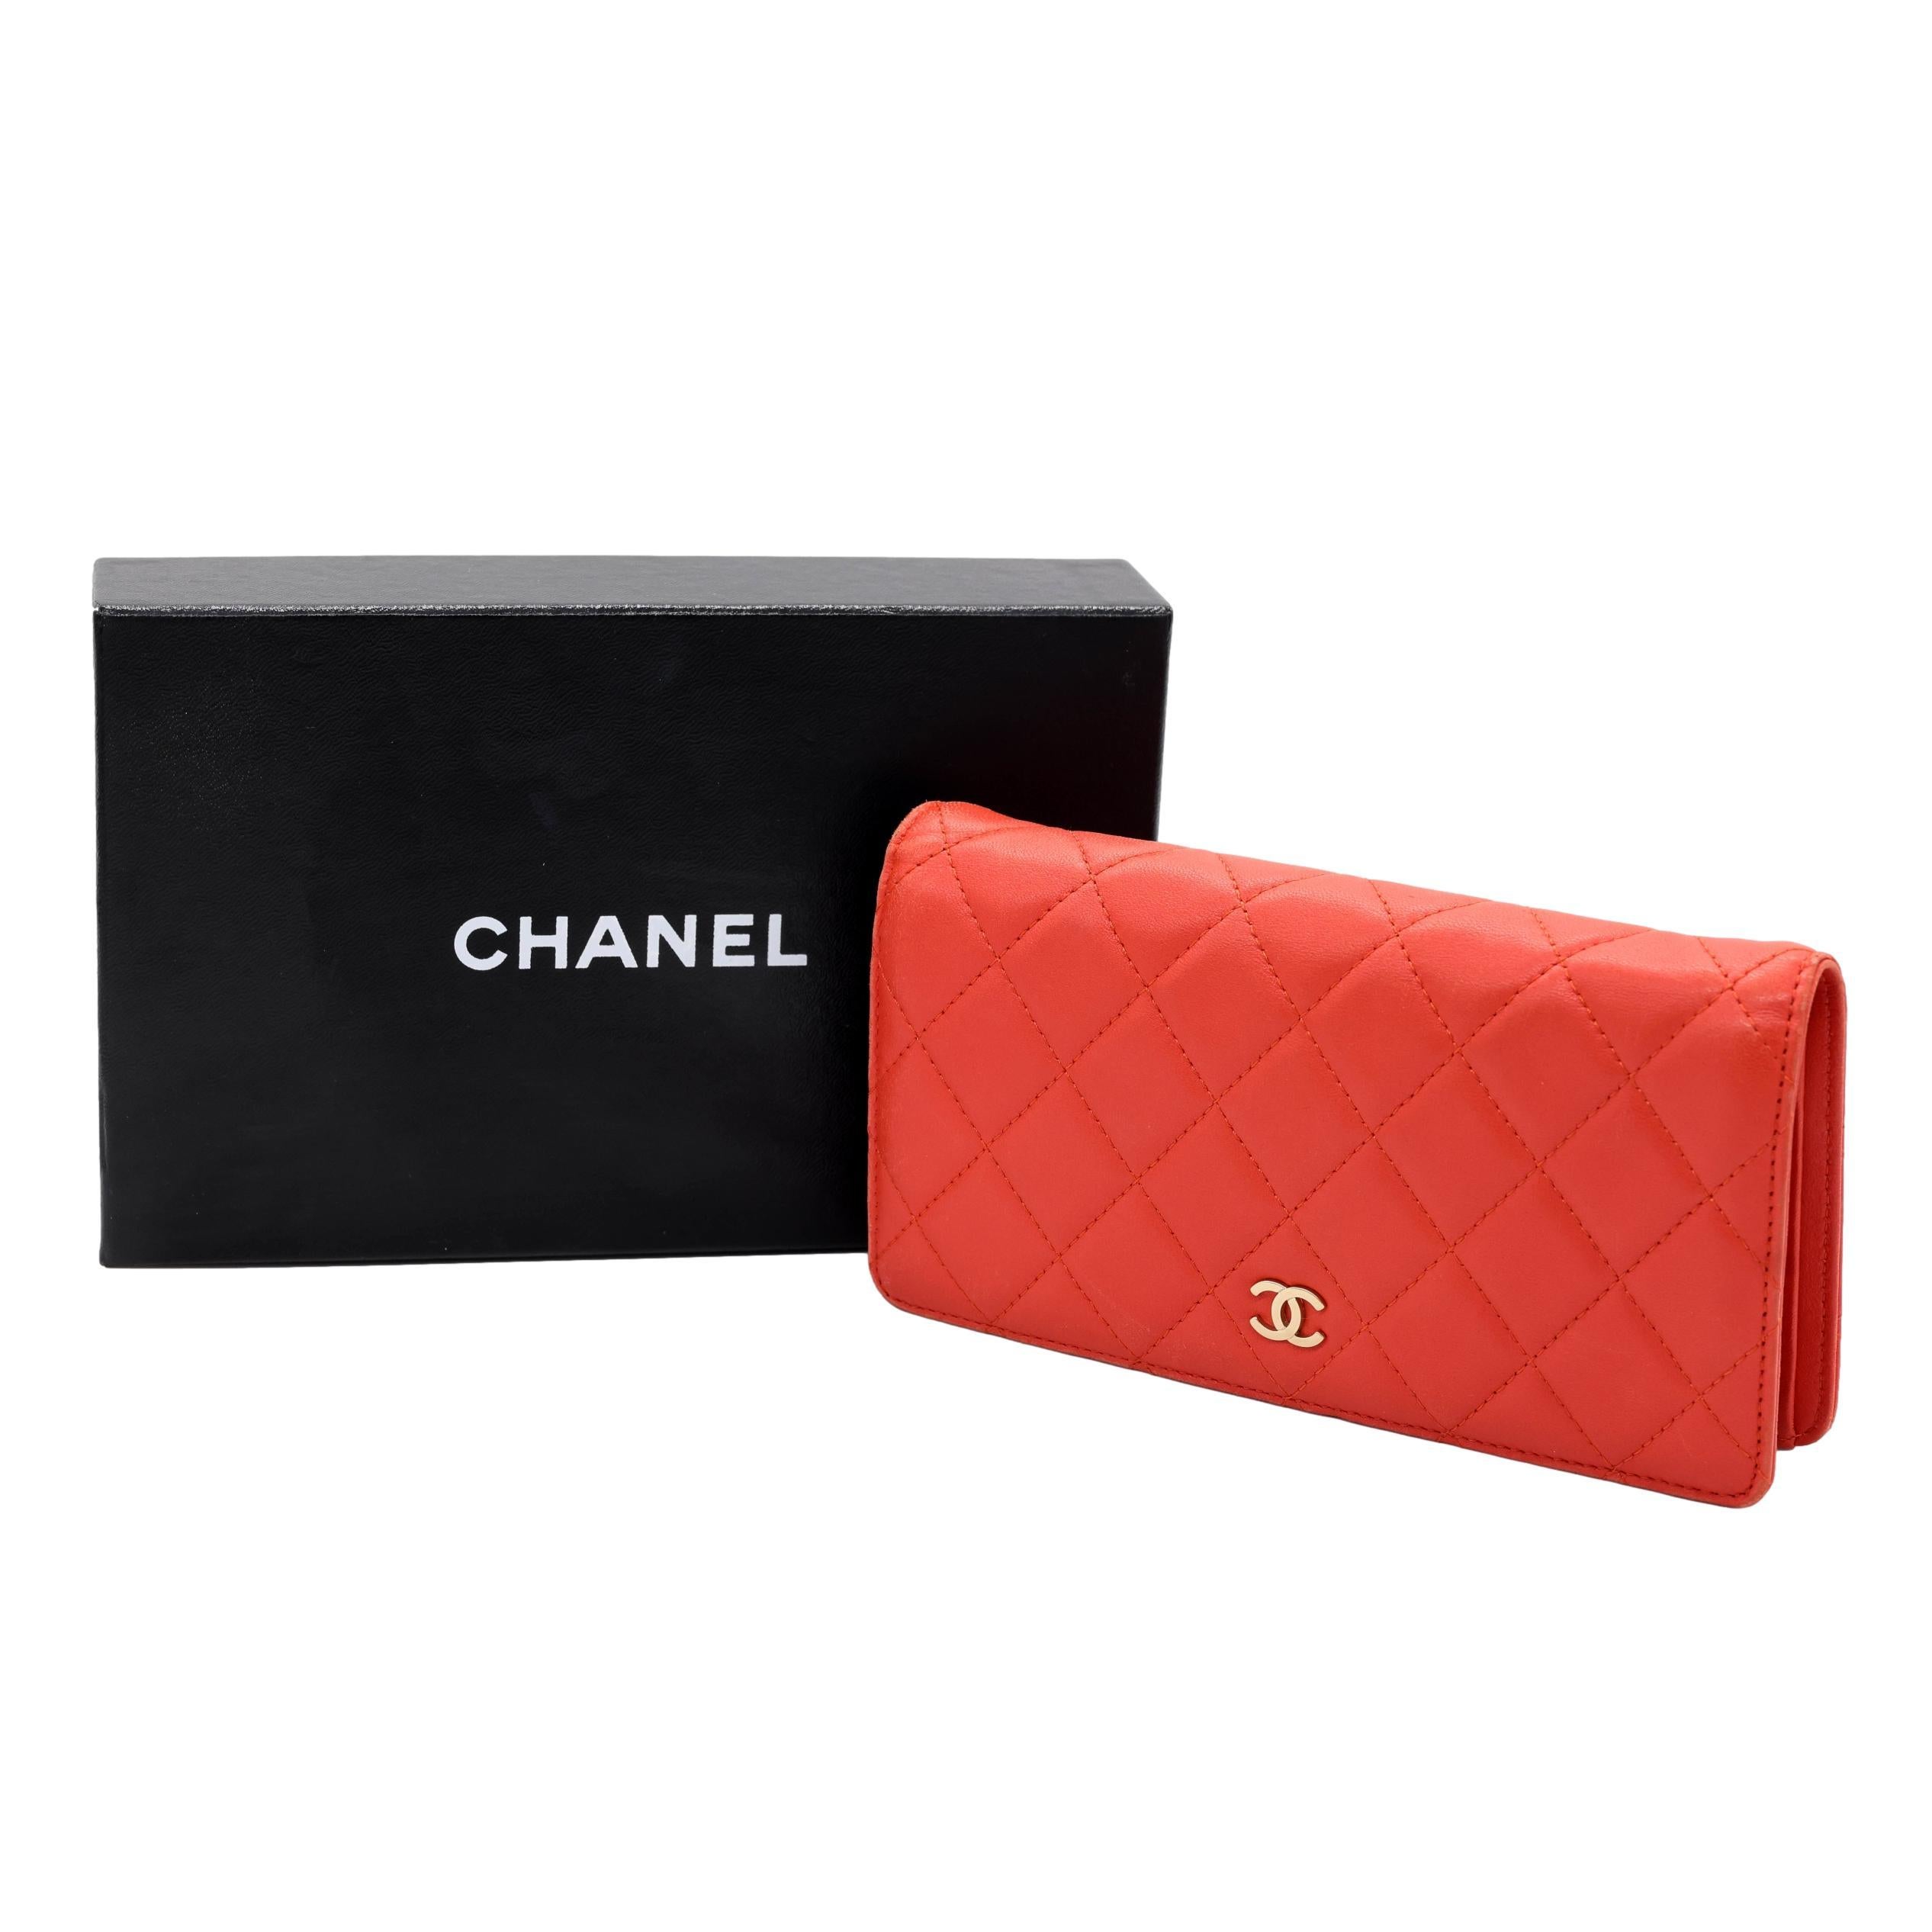 Chanel Quilted Coral Lambskin Leather Yen Continental Wallet, 2009 - 2010. 8